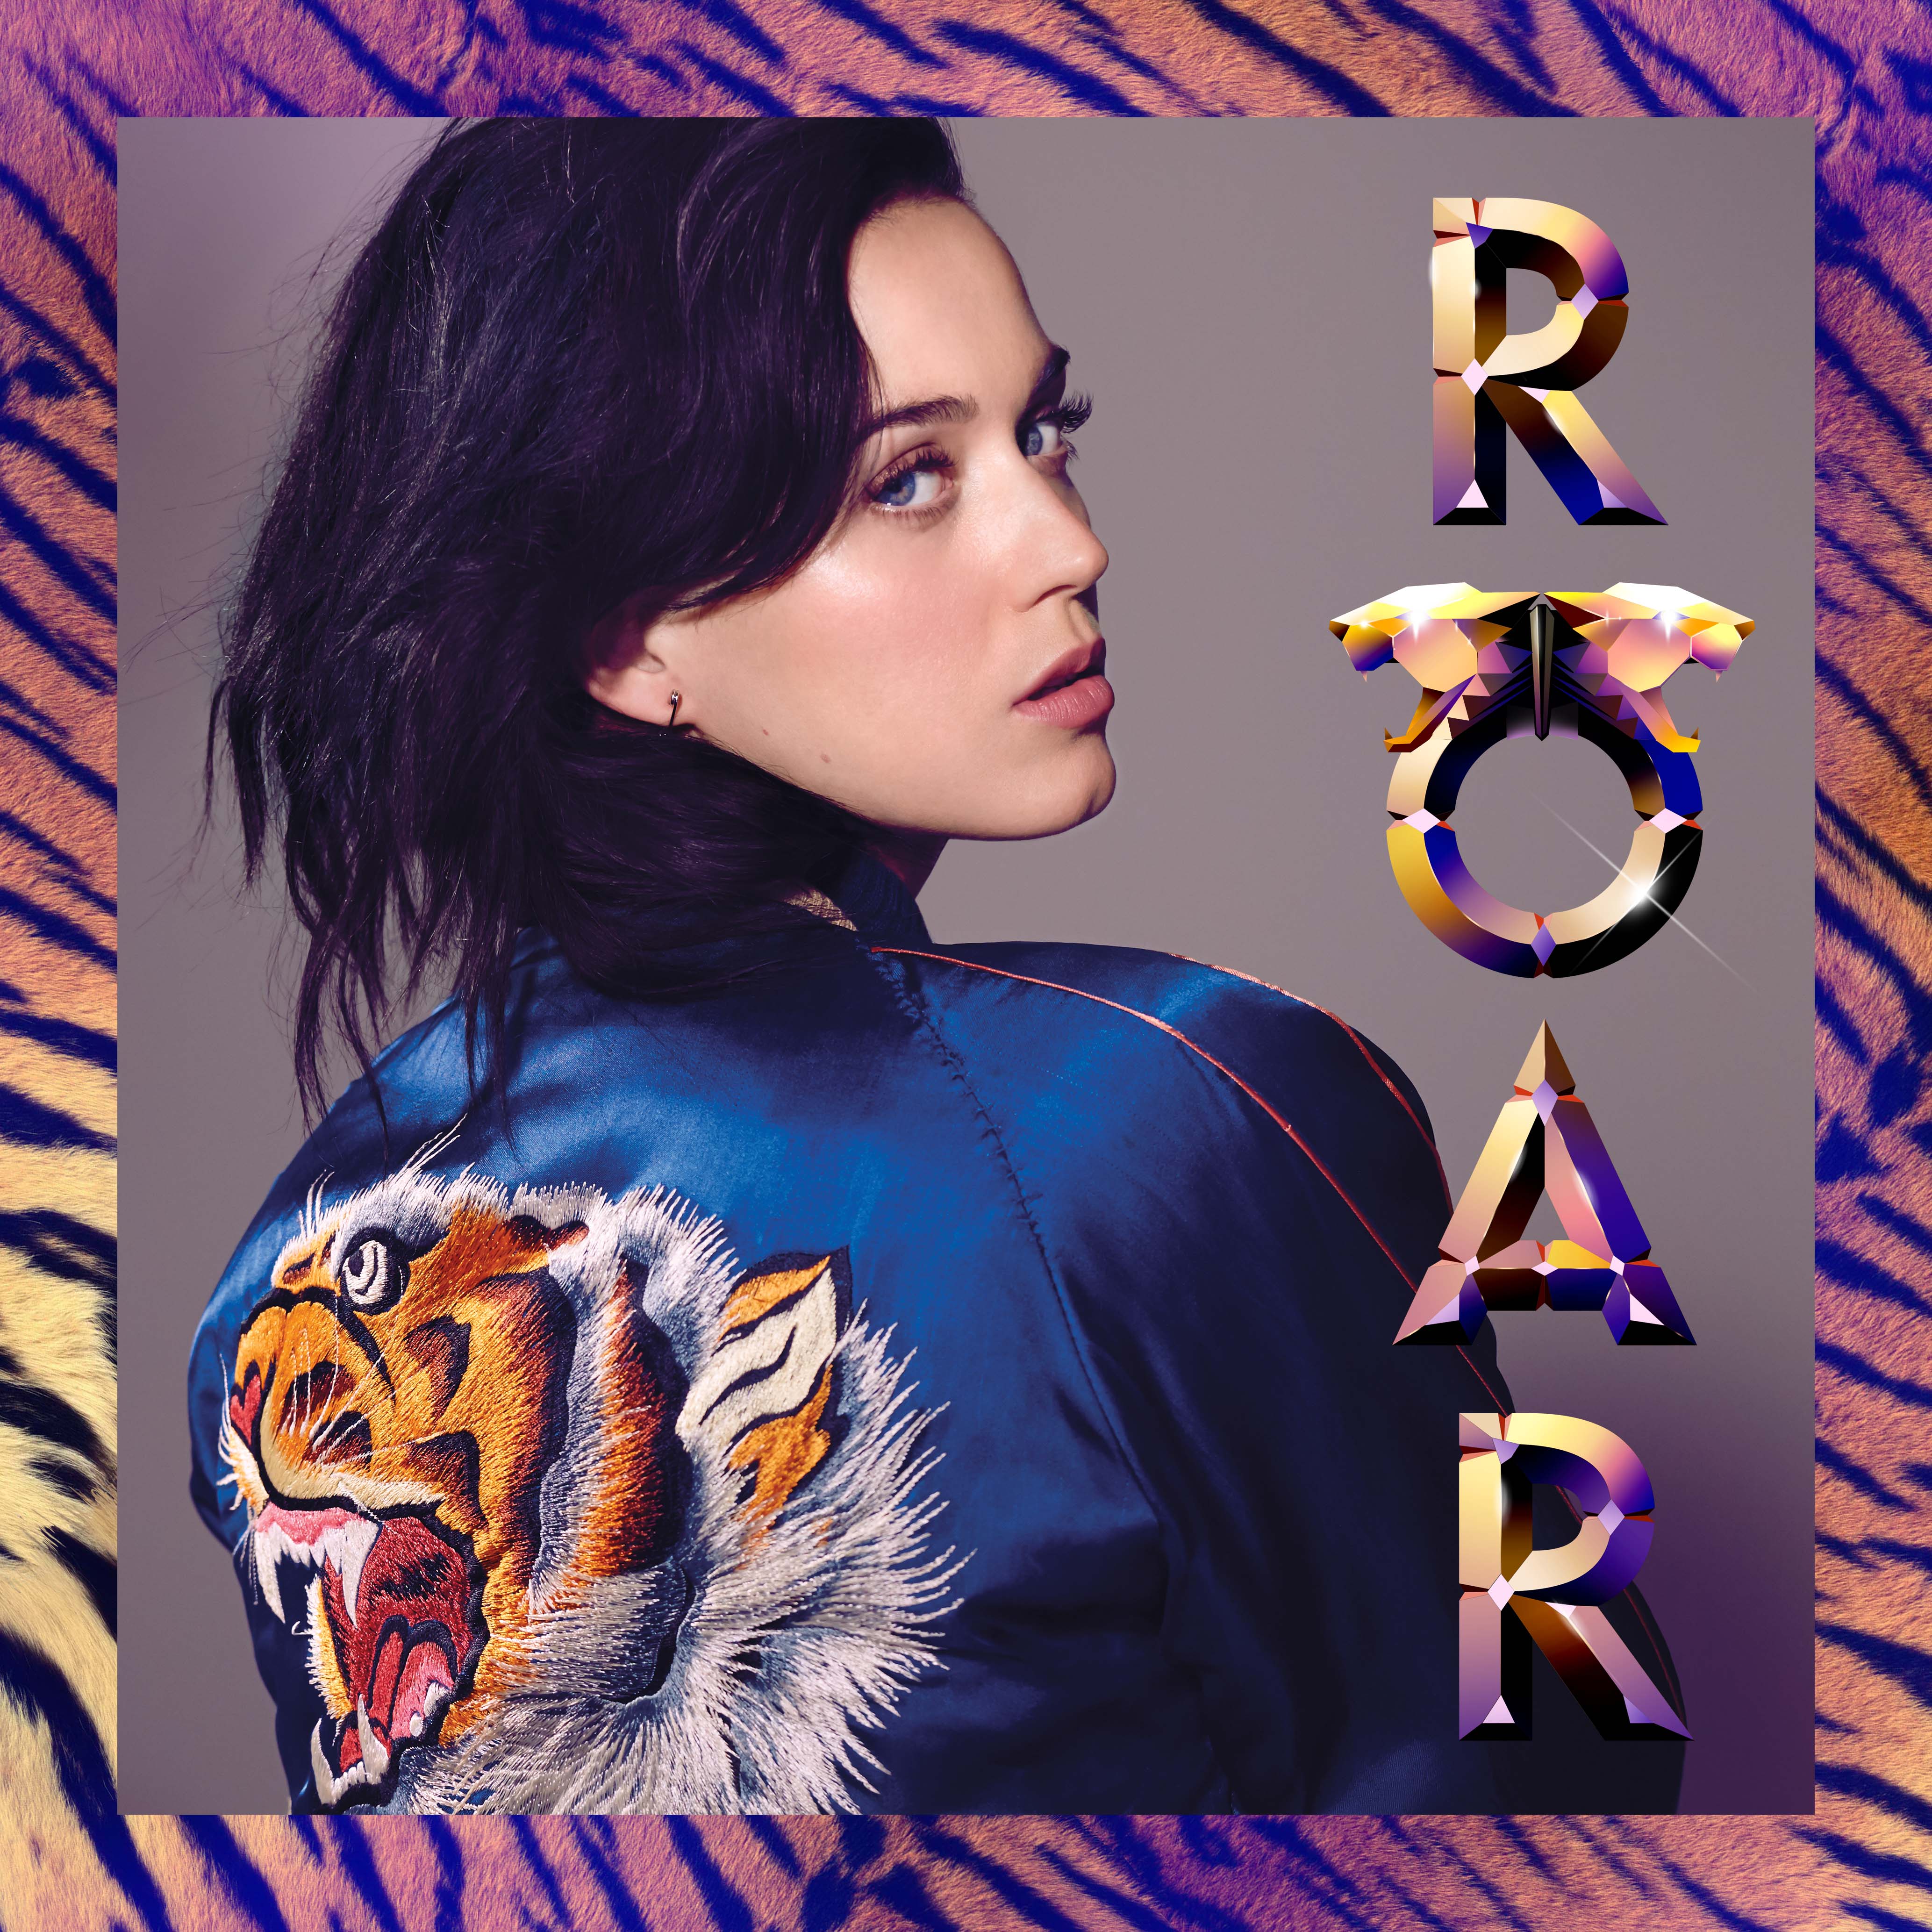 This Just In: Listen to Katy Perry's 'Roar'-ing New Song!